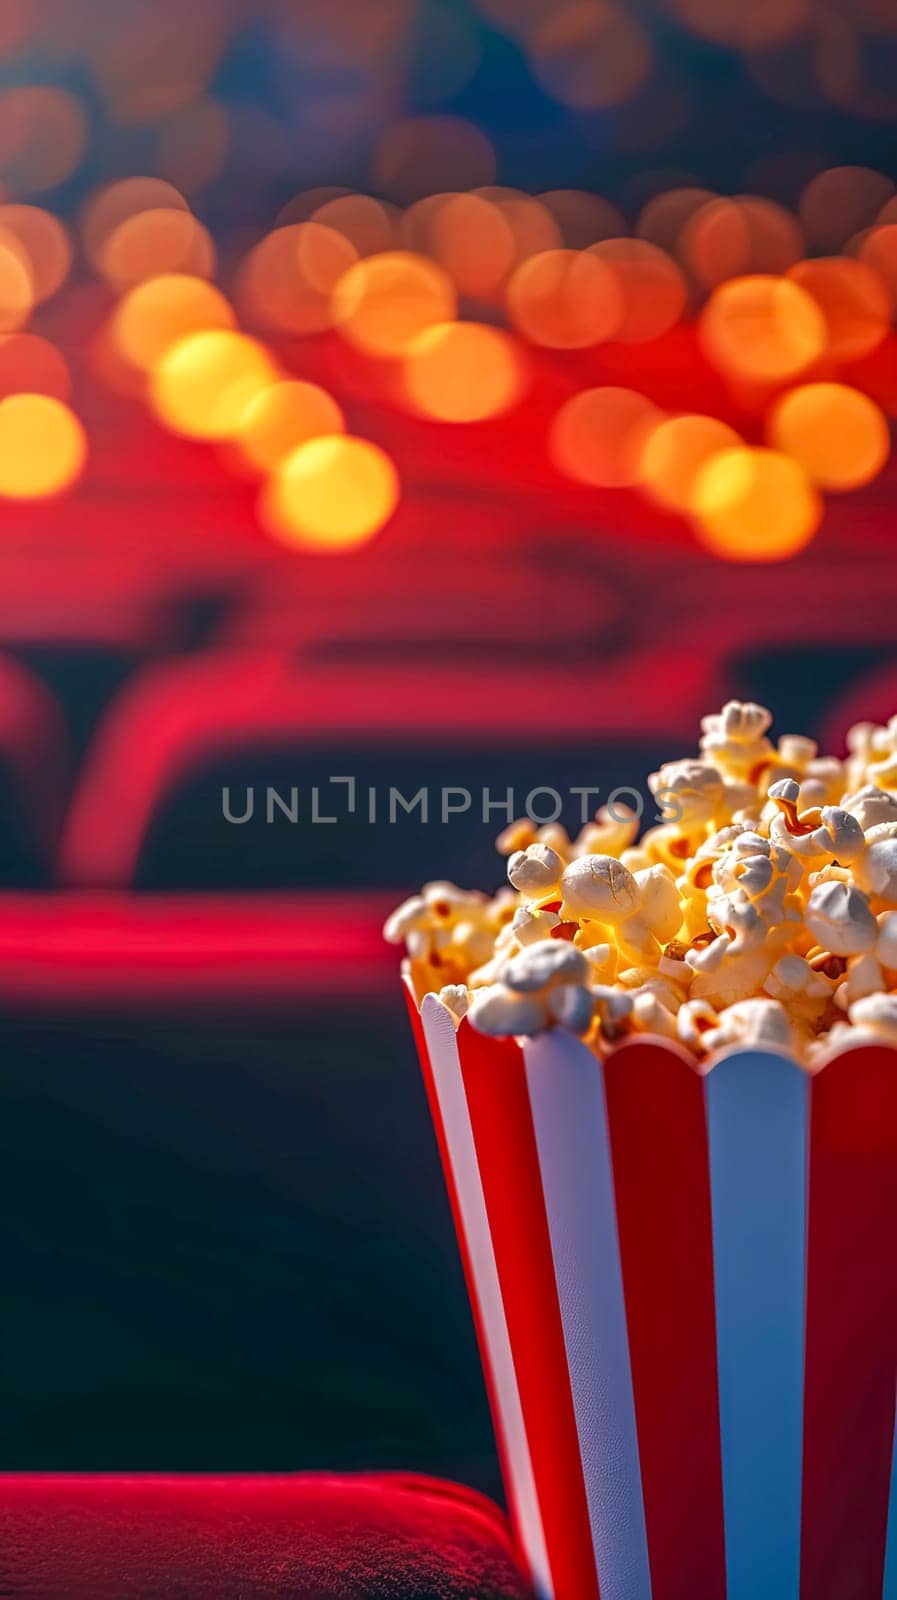 essence of movie time with a close-up of a classic red and white striped popcorn box filled with fluffy kernels, set against the blurred backdrop of red cinema seats and golden bokeh lights, vertical